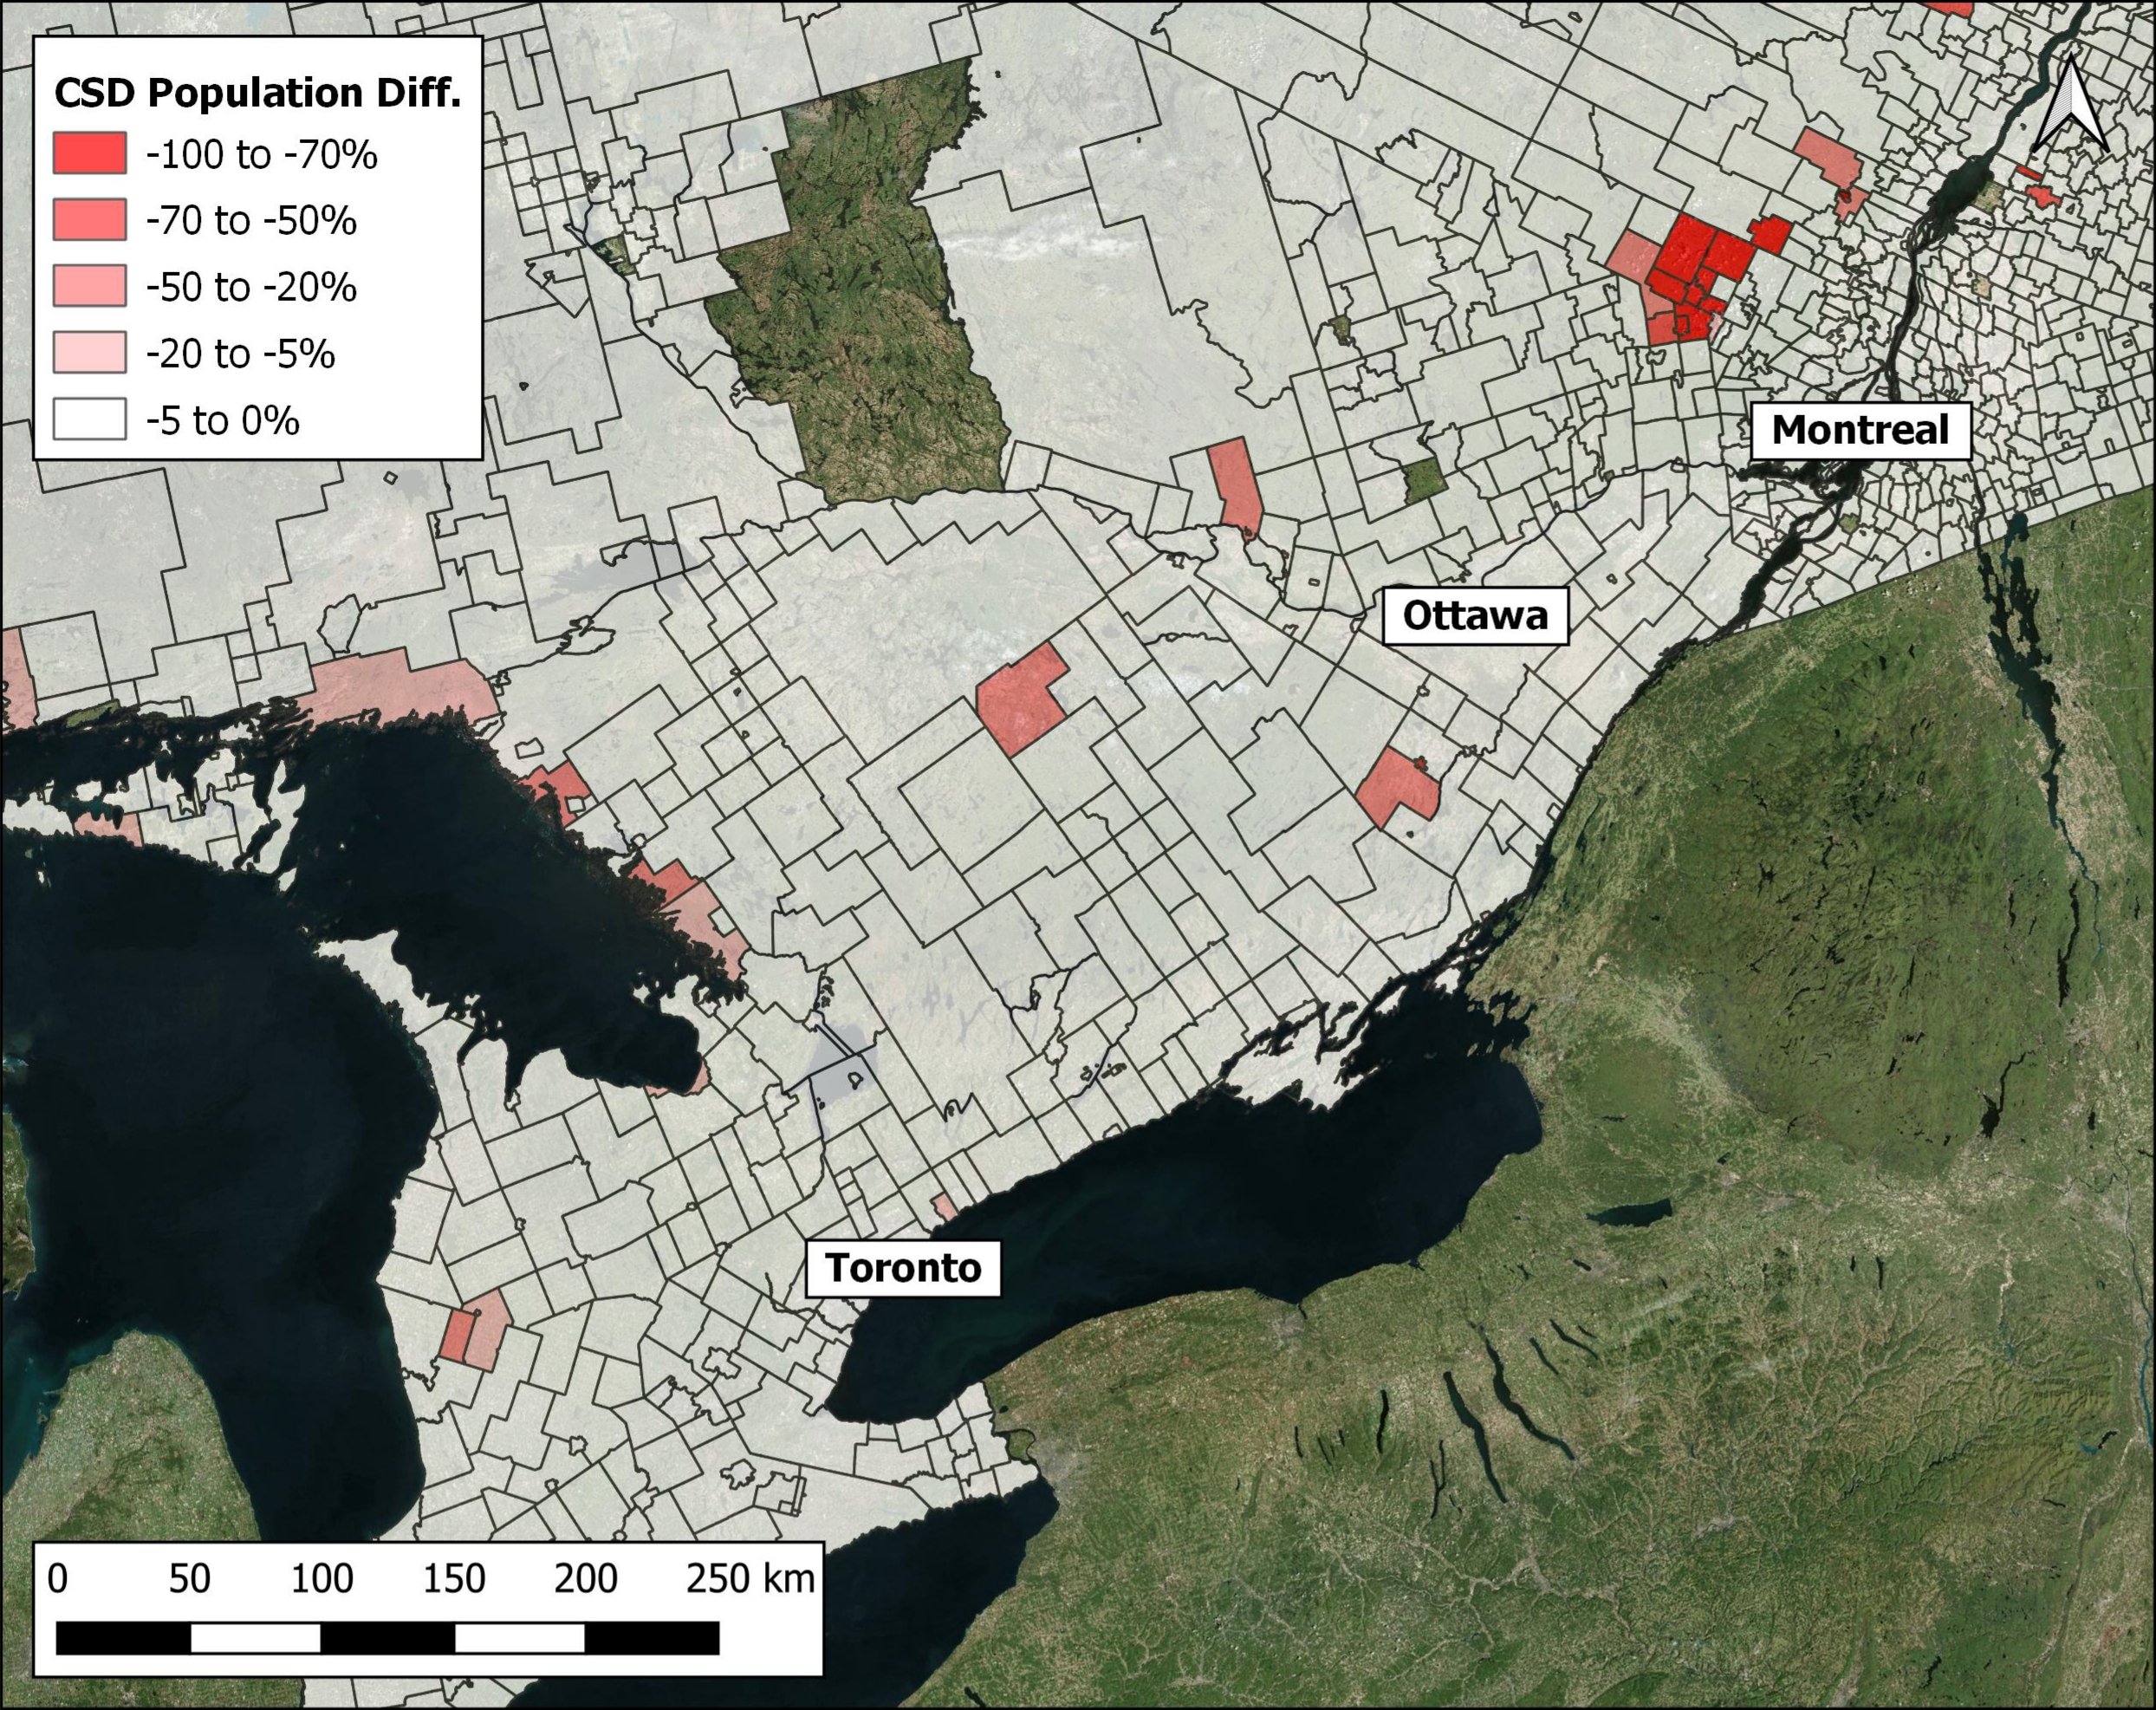 Census sub-divisions with large population differences in the southern part of Quebec and Ontario